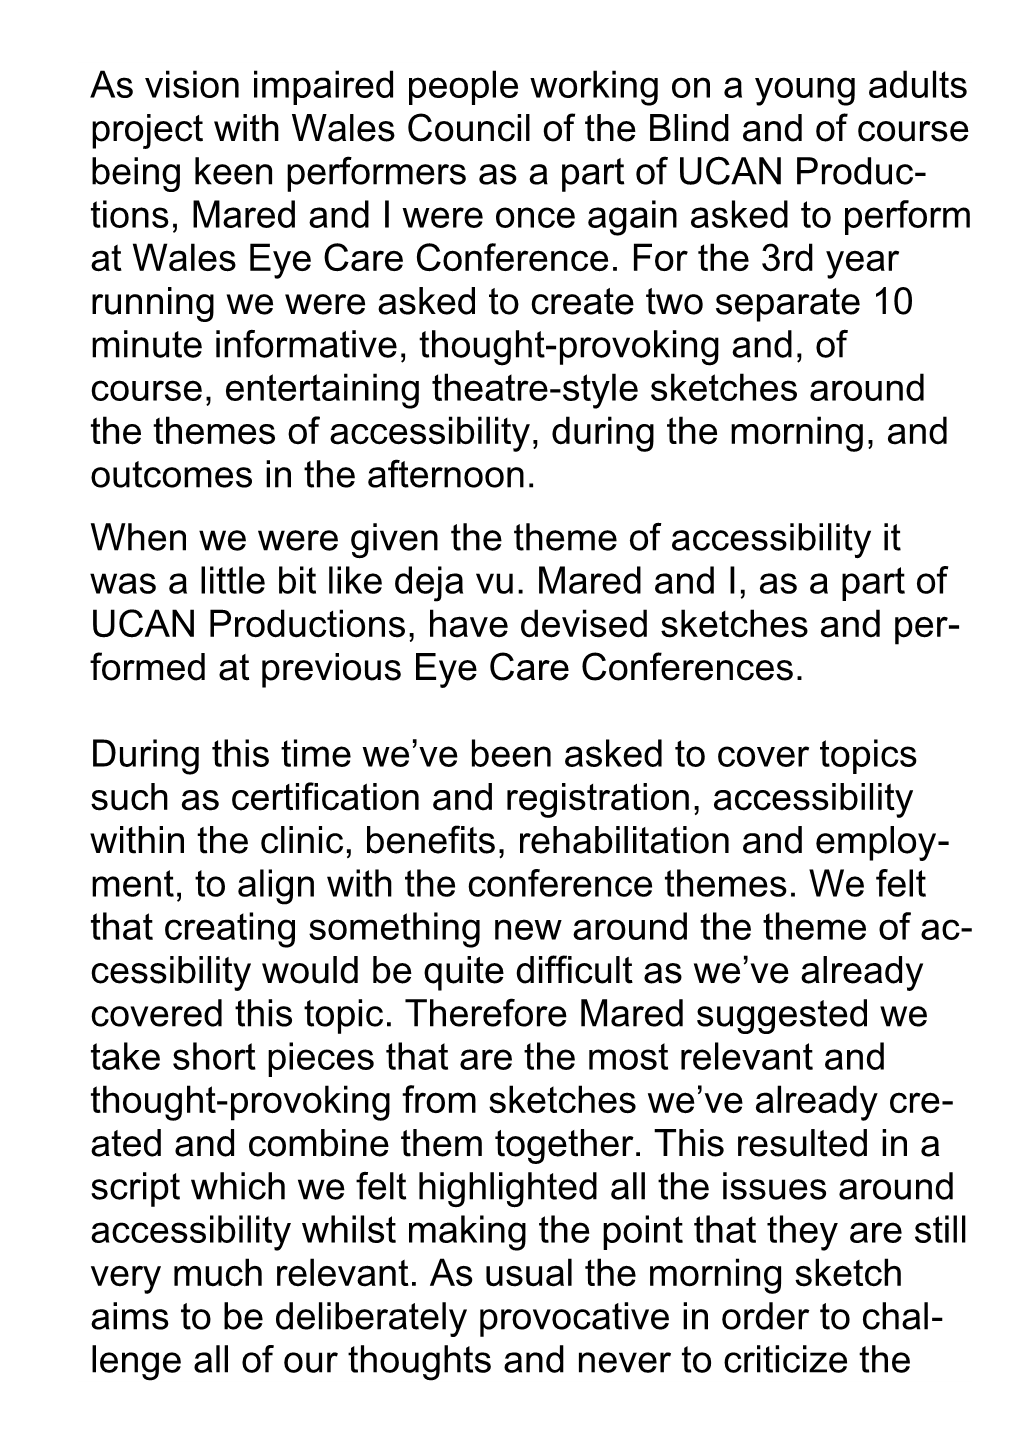 Storm WCB / UCAN Productions Perform at the Wales Eye Care Conference